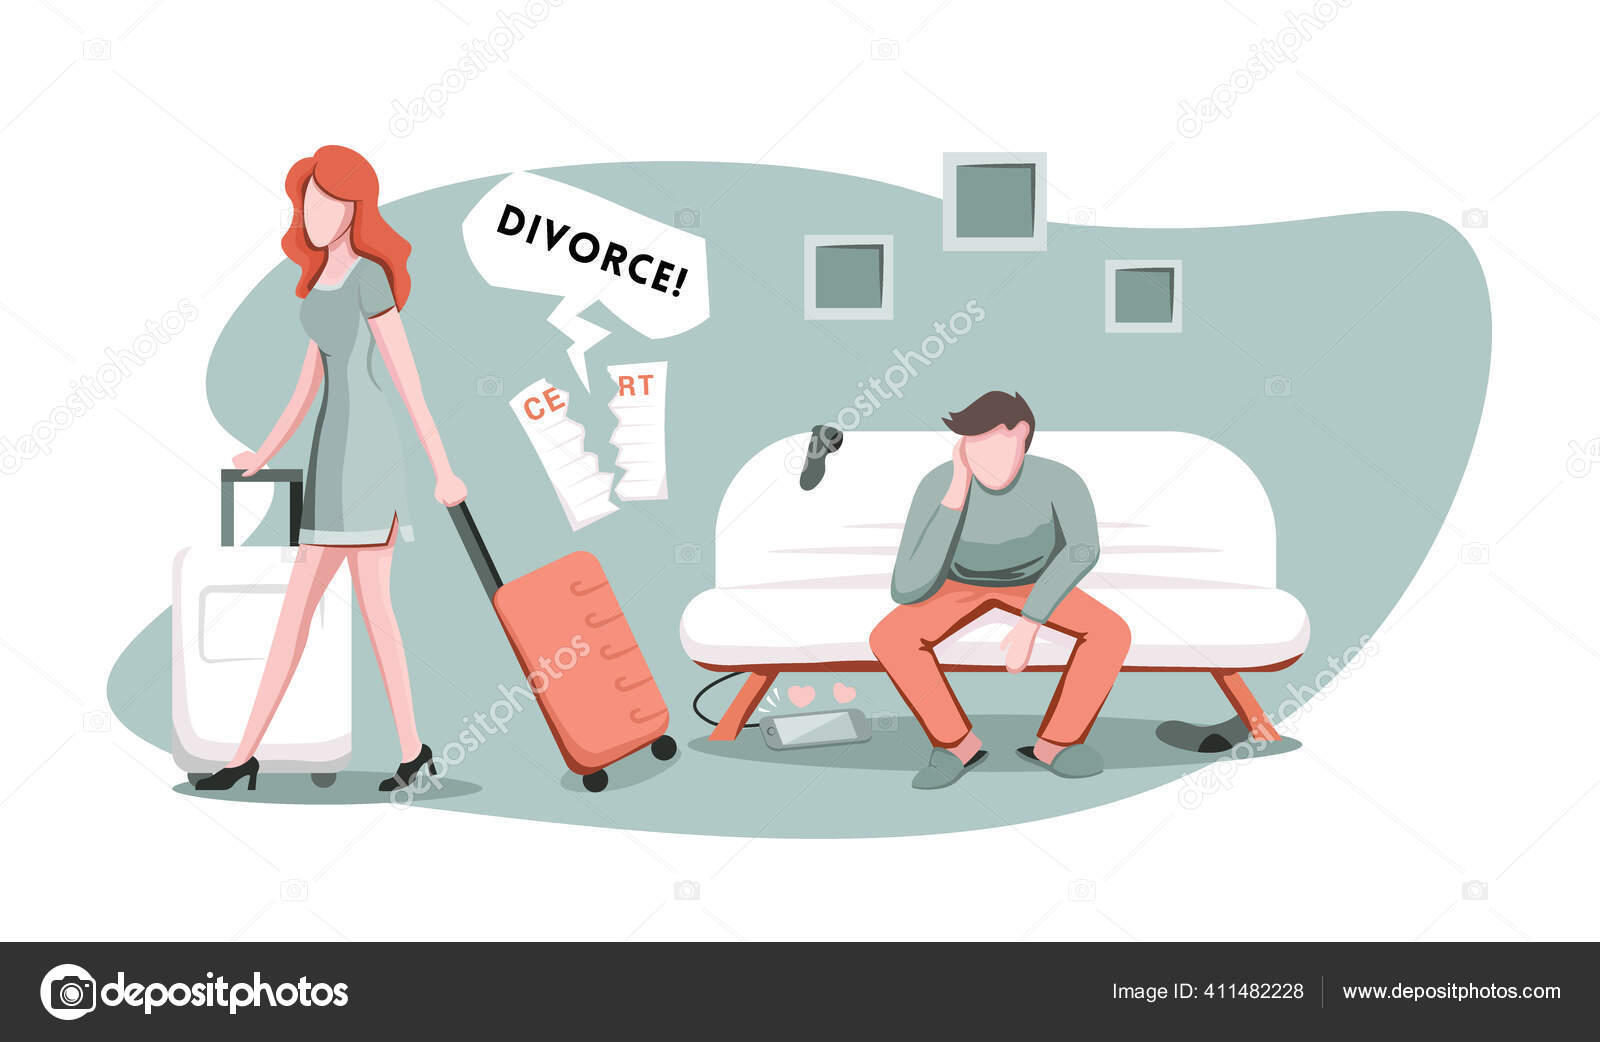 Angry wife Vector Art Stock Images | Depositphotos